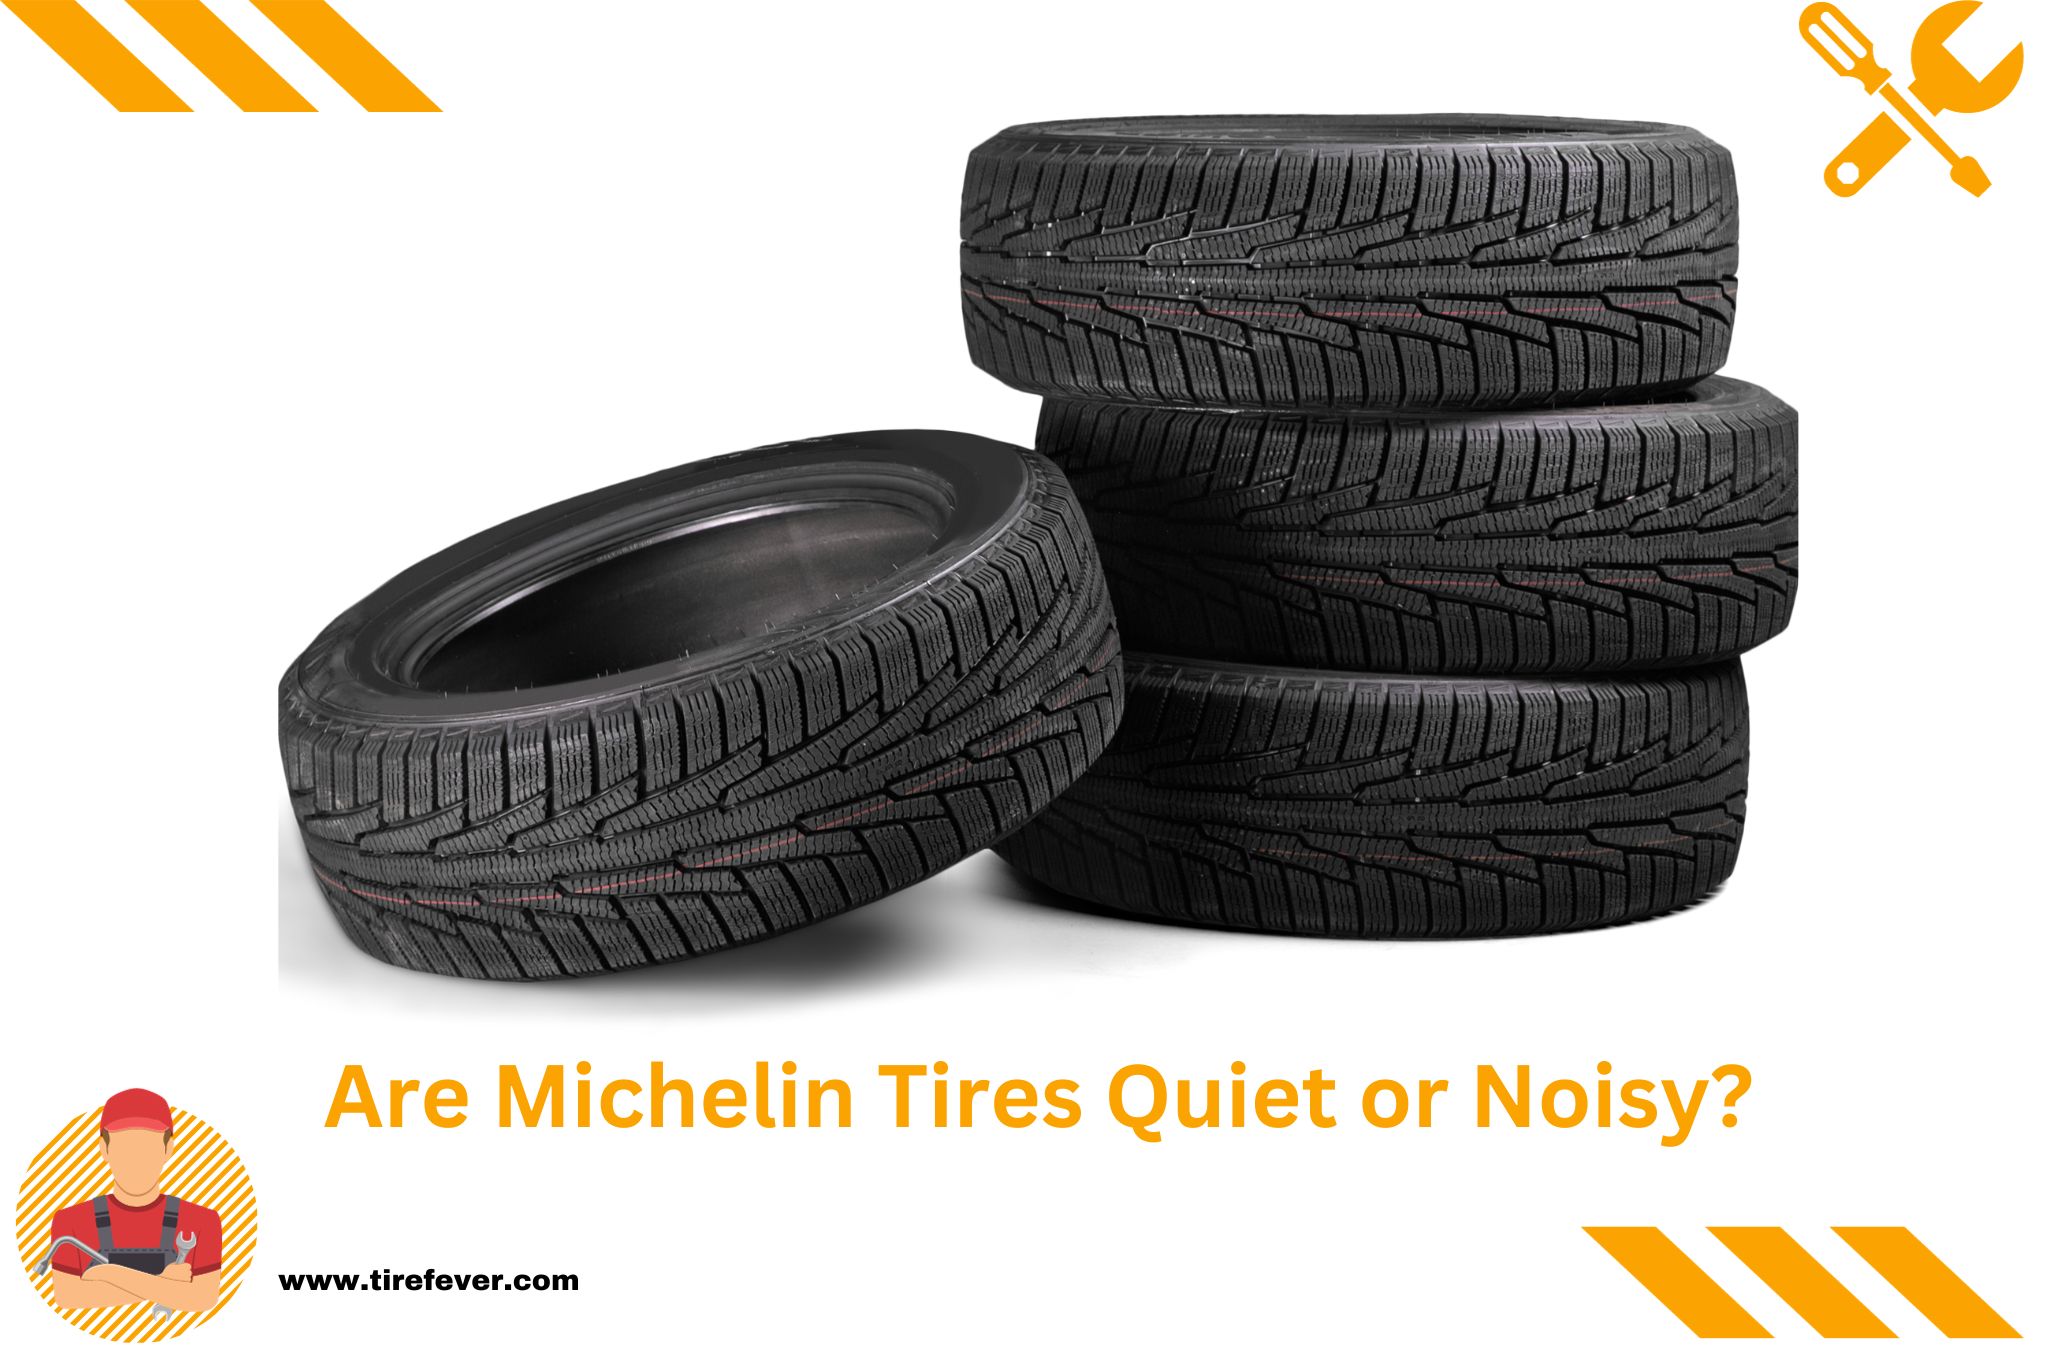 Are Michelin Tires Quiet or Noisy?